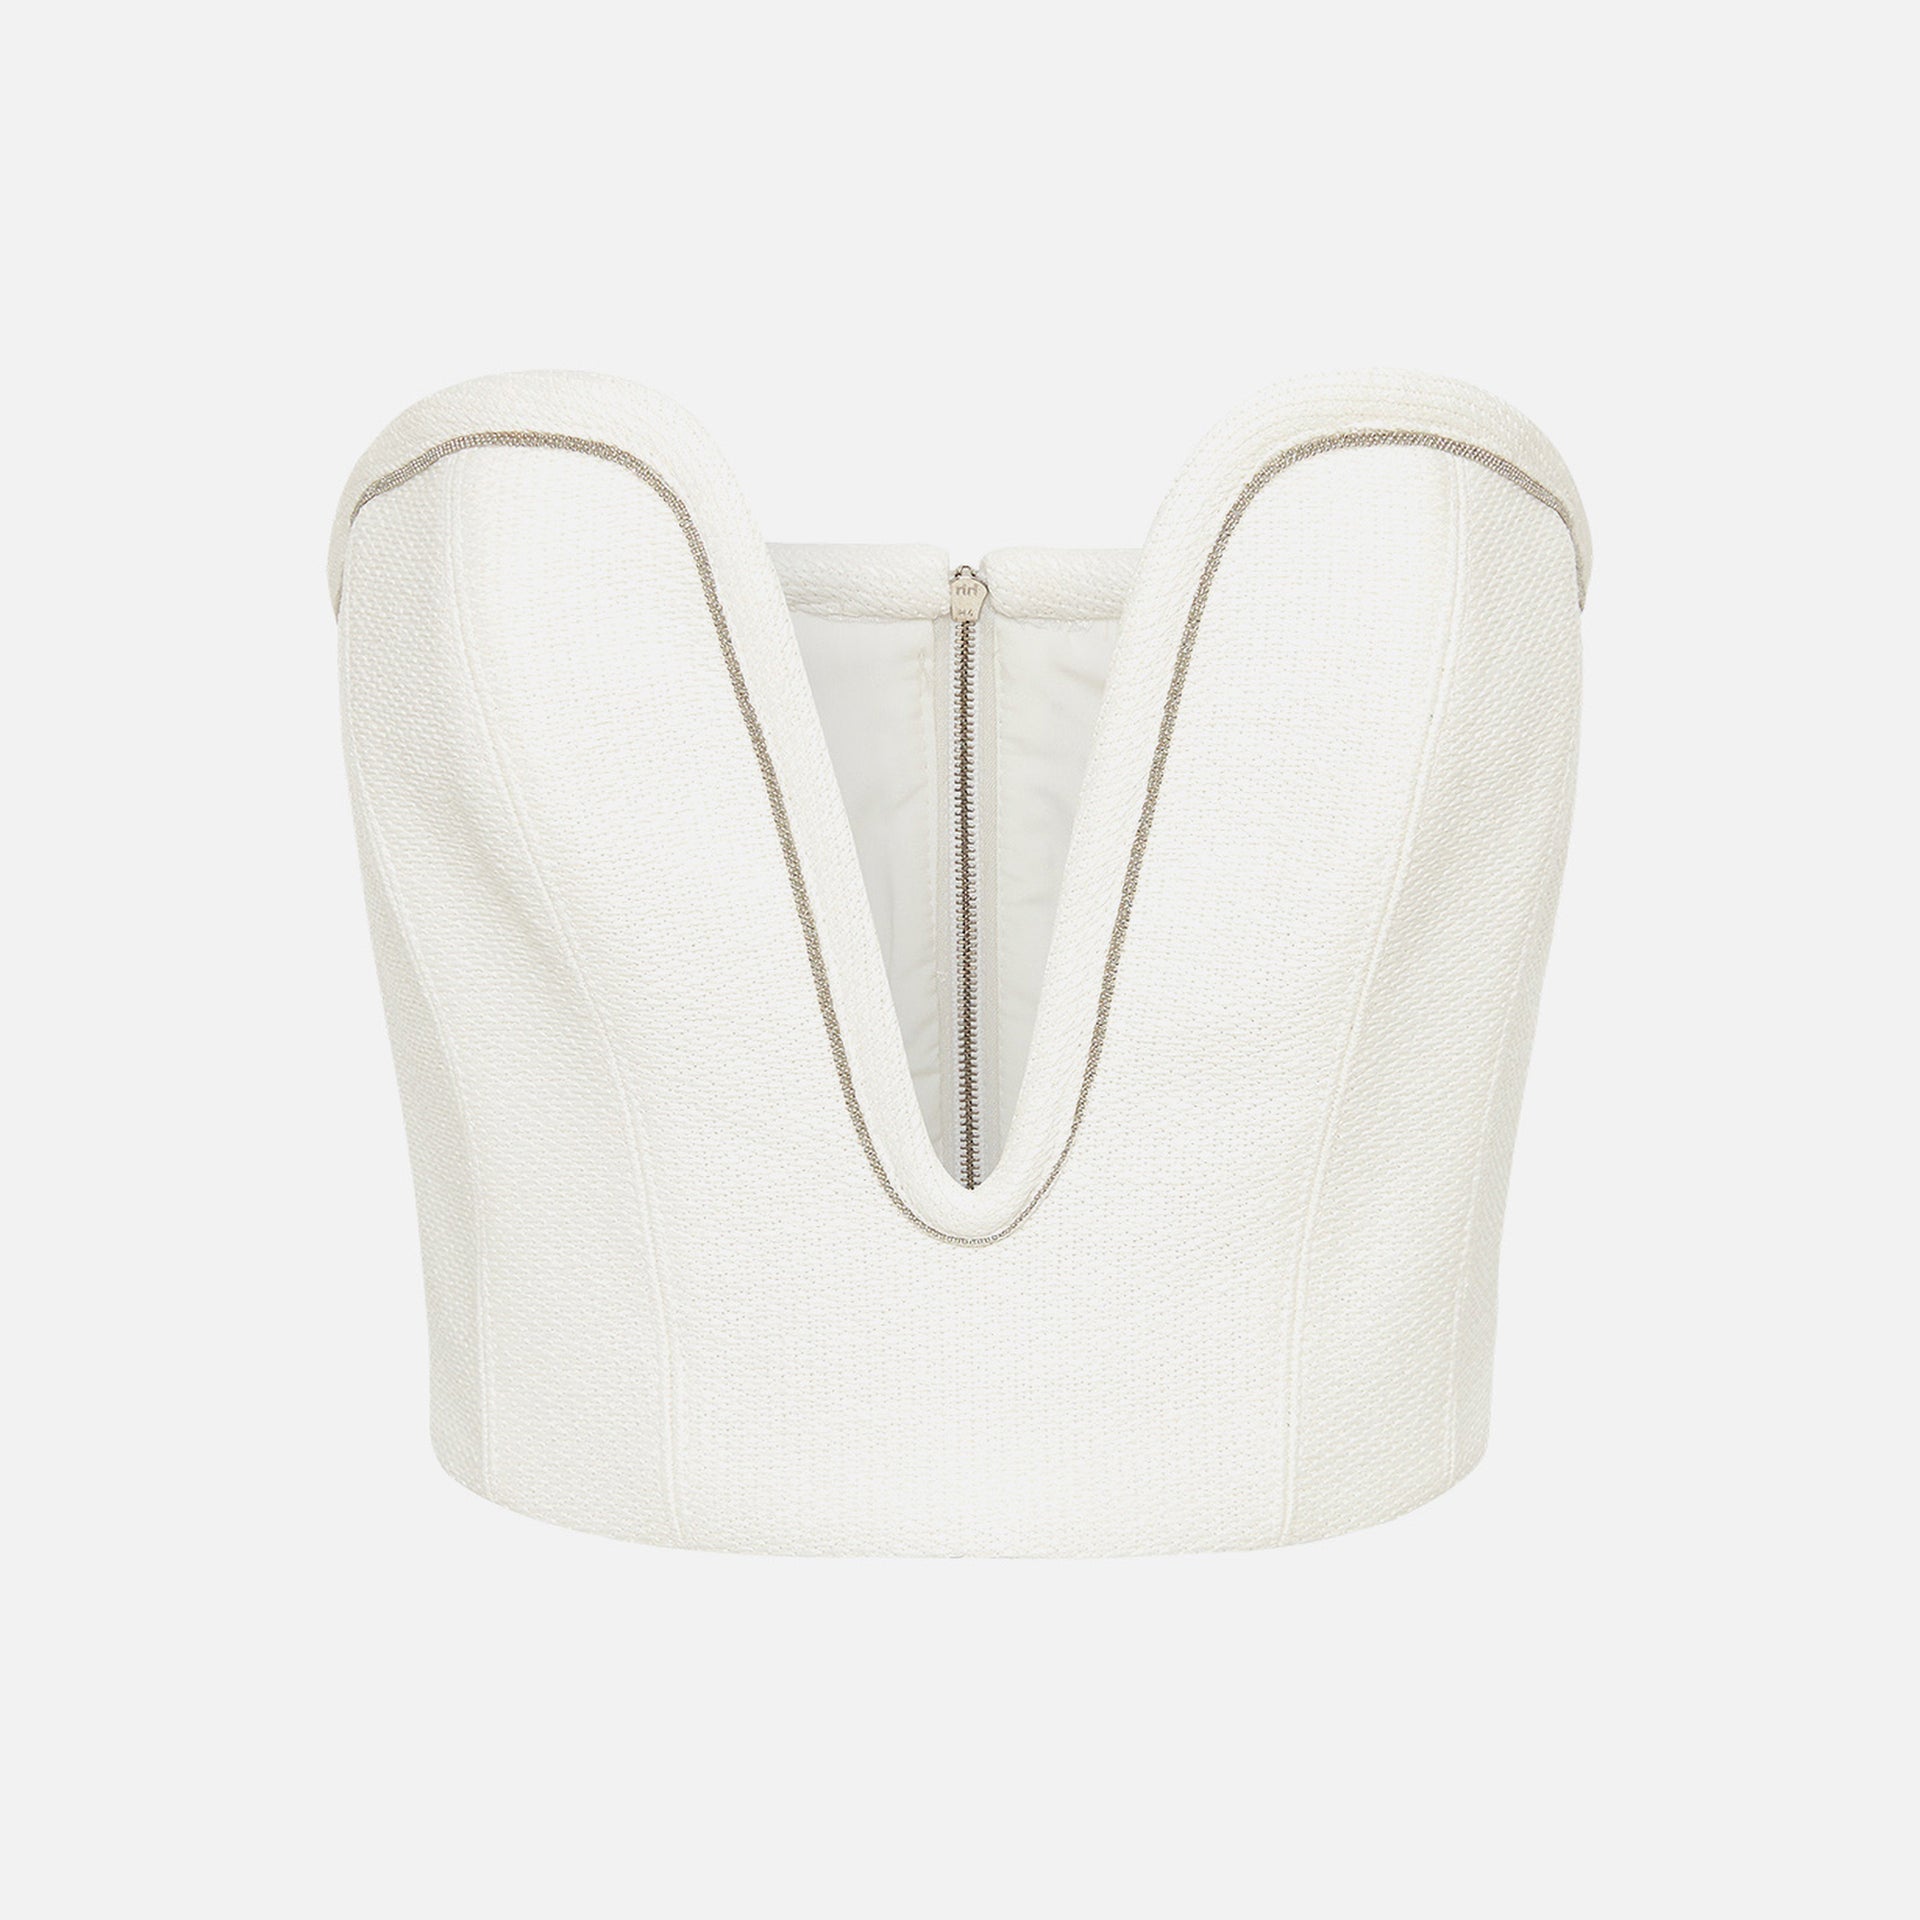 Manning Cartell Cosmic Turn Bustier Top - White